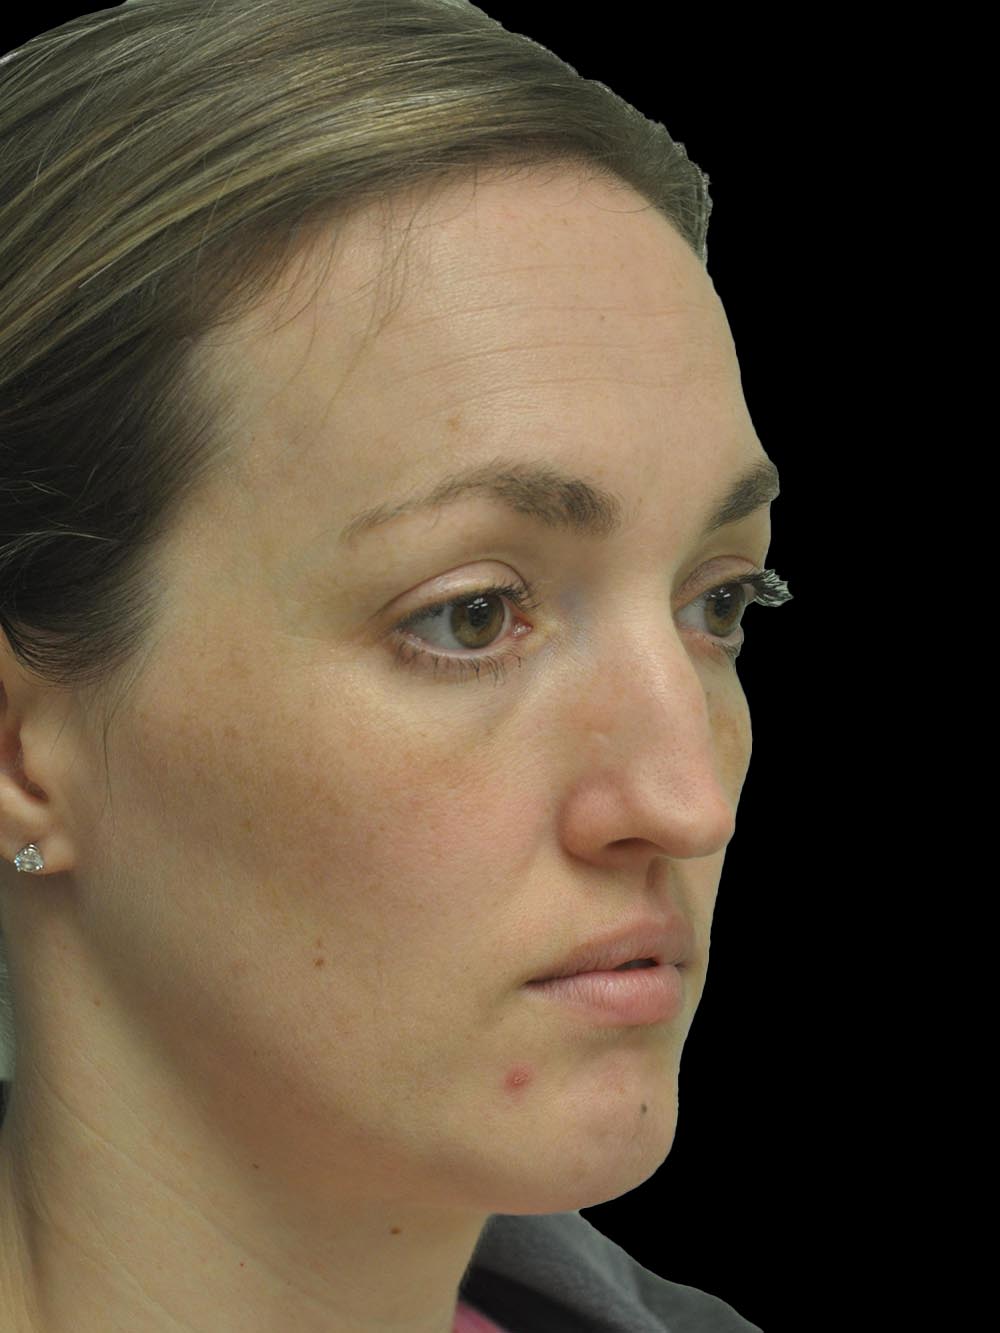 Photo of the patient’s face before the Rhinoplasty surgery. Patient 16 - Set 4